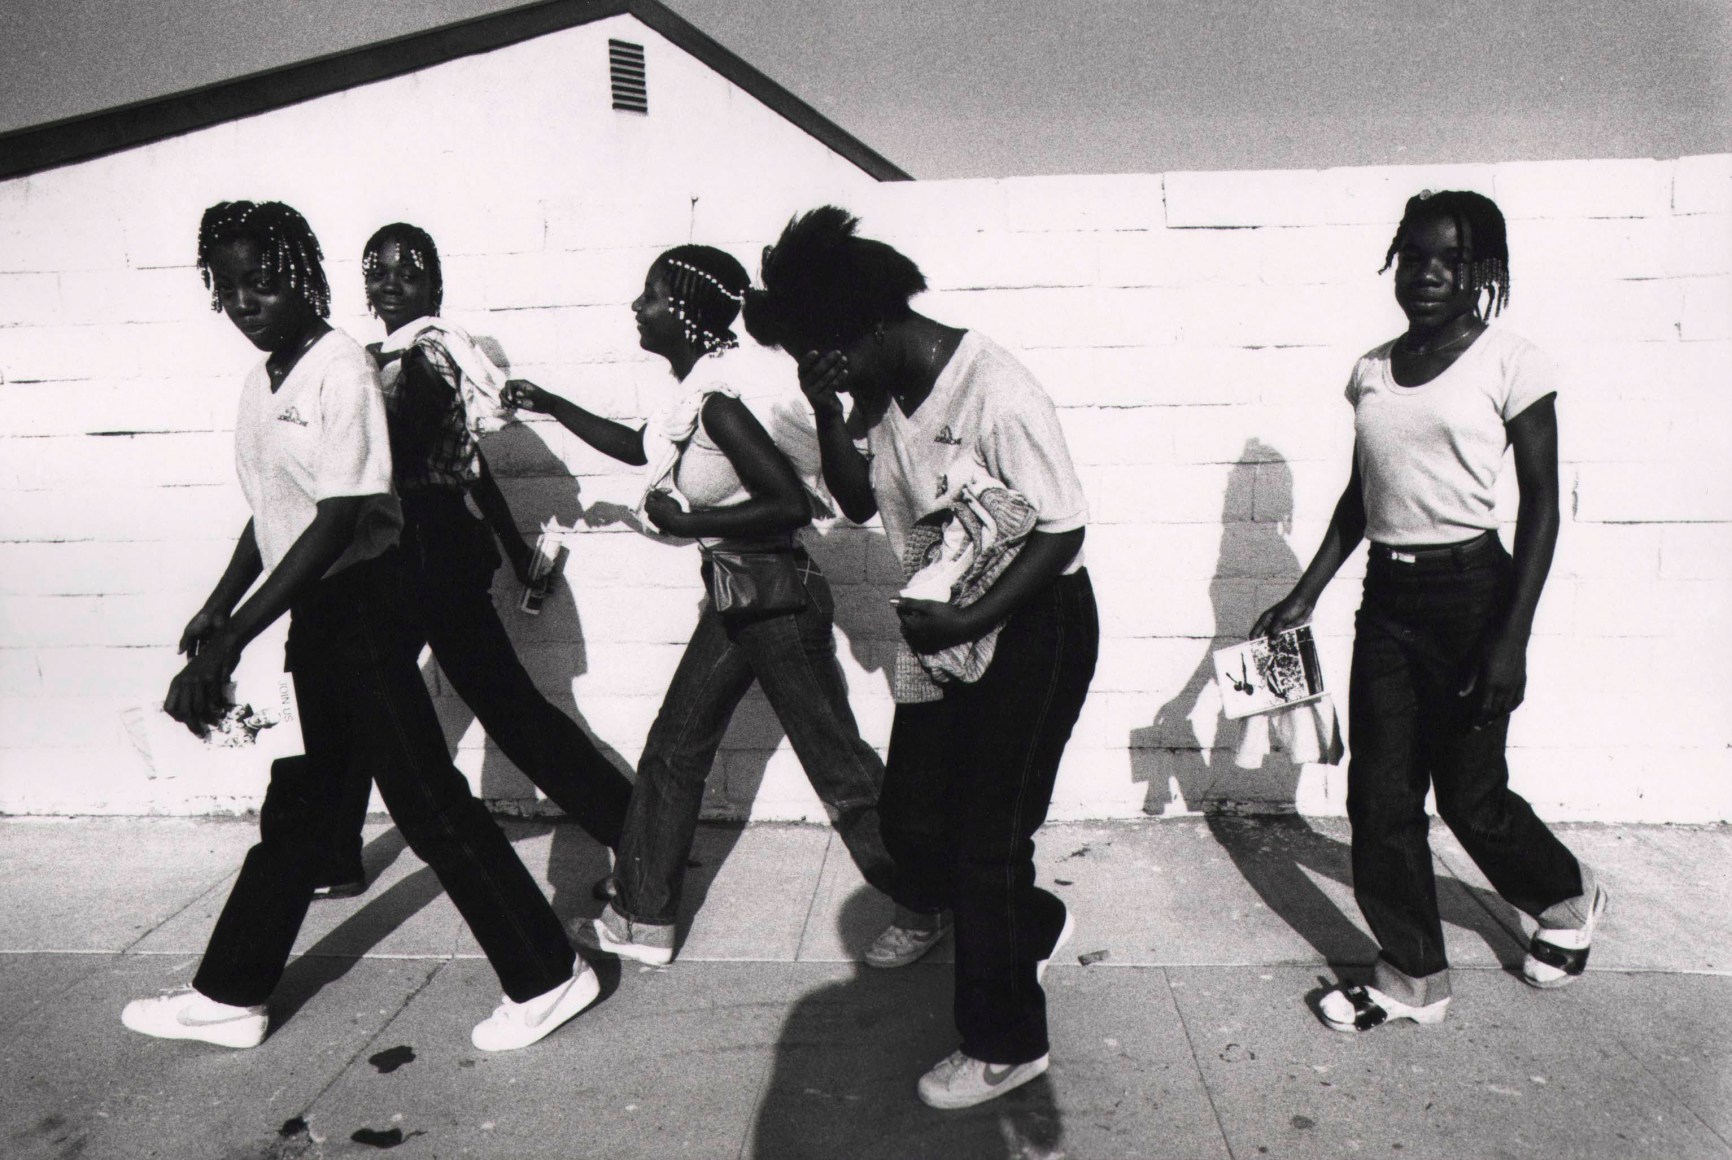 32.&nbsp;Anthony Barboza (African-American, b. 1944), Watts, Los Angeles, CA. (for LIFE Magazine), c. 1970s